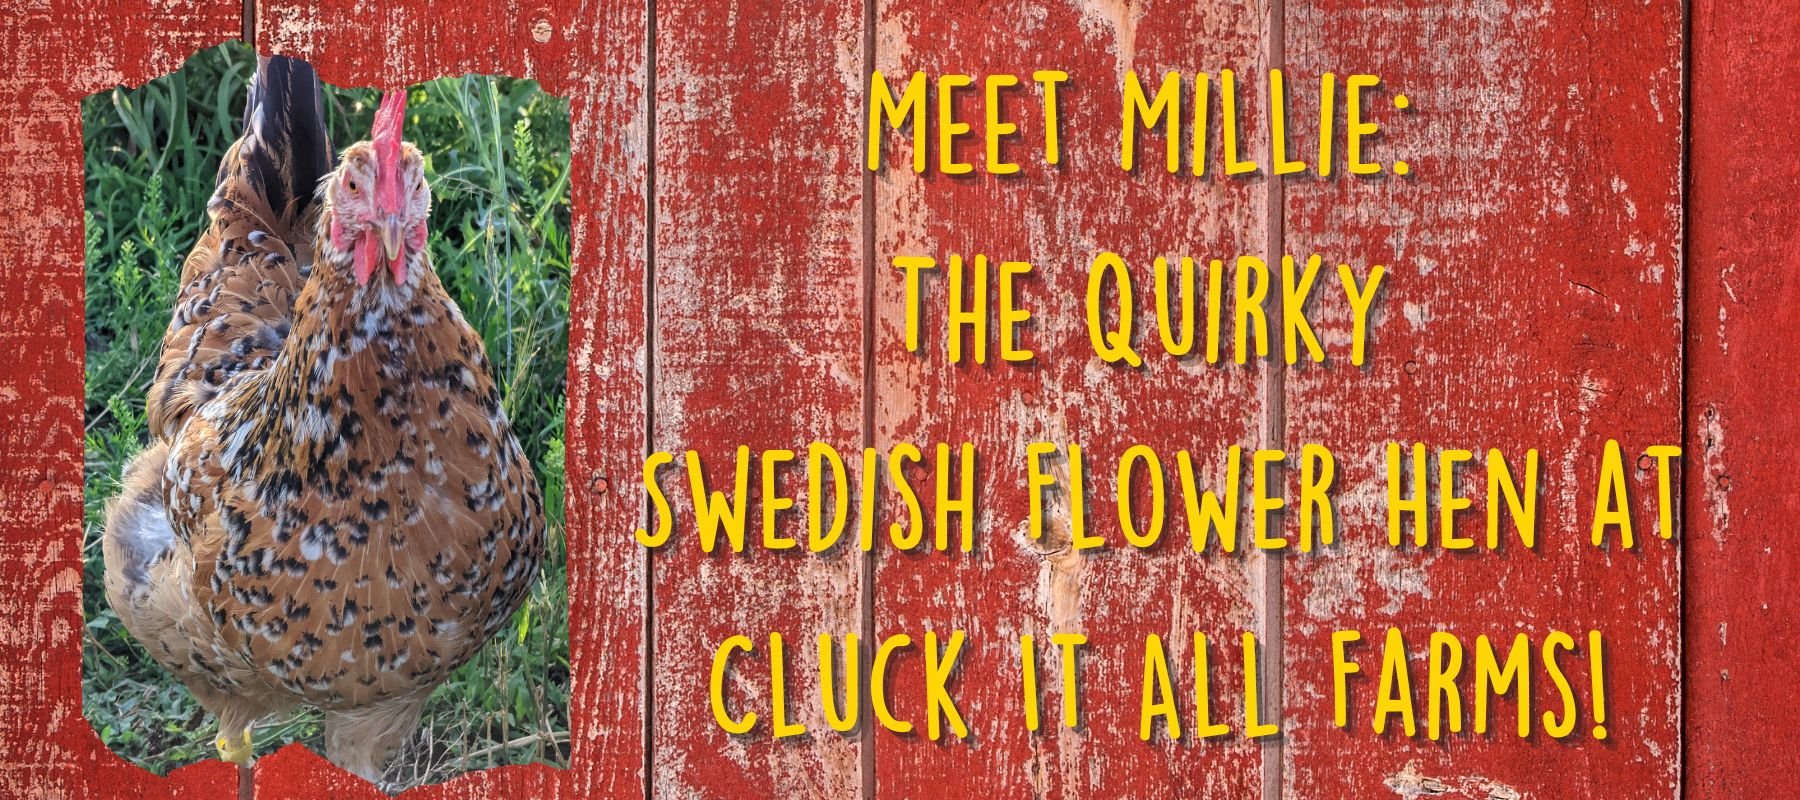 Meet Millie: The Quirky Swedish Flower Hen at Cluck It All Farms! - Cluck It All Farms